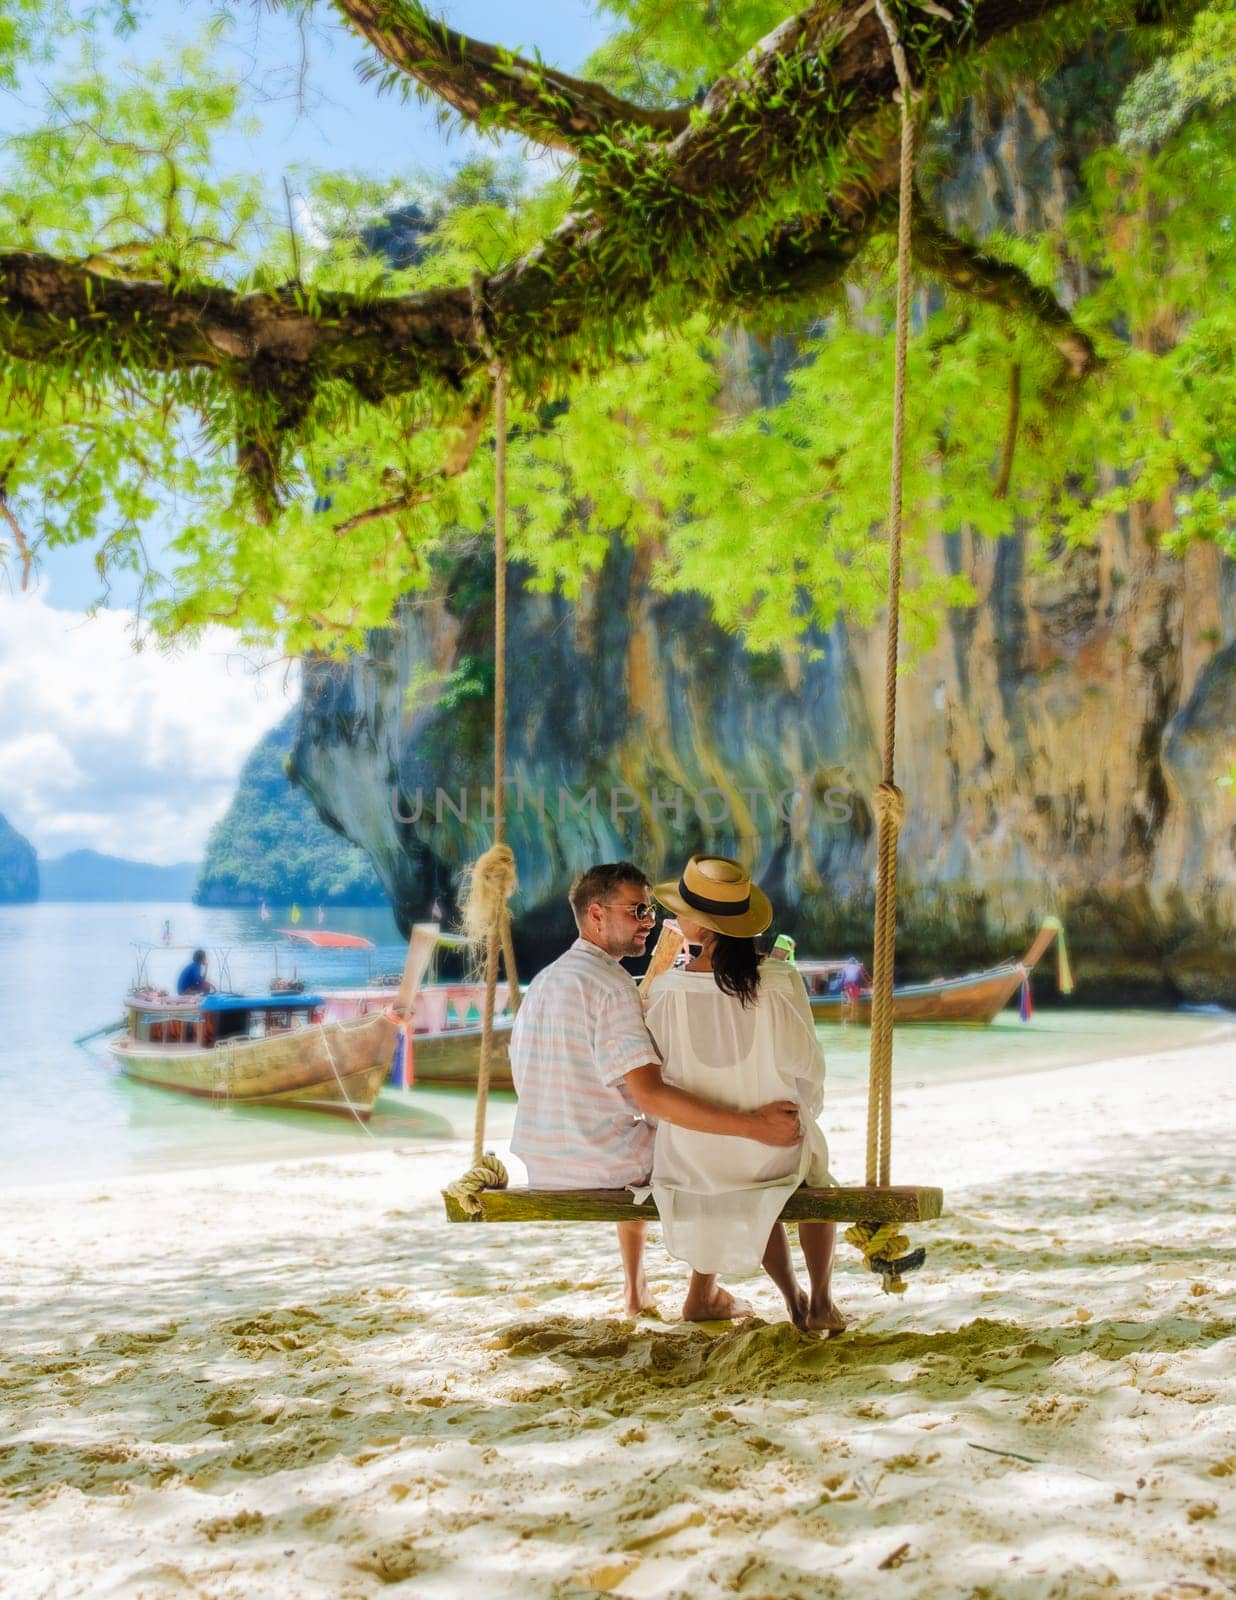 Koh Lao Lading near Koh Hong Krabi Thailand, is a beautiful beach with longtail boats, a couple of European men, and an Asian woman on the beach relaxing on a swing under a tree. Couple on a boat trip